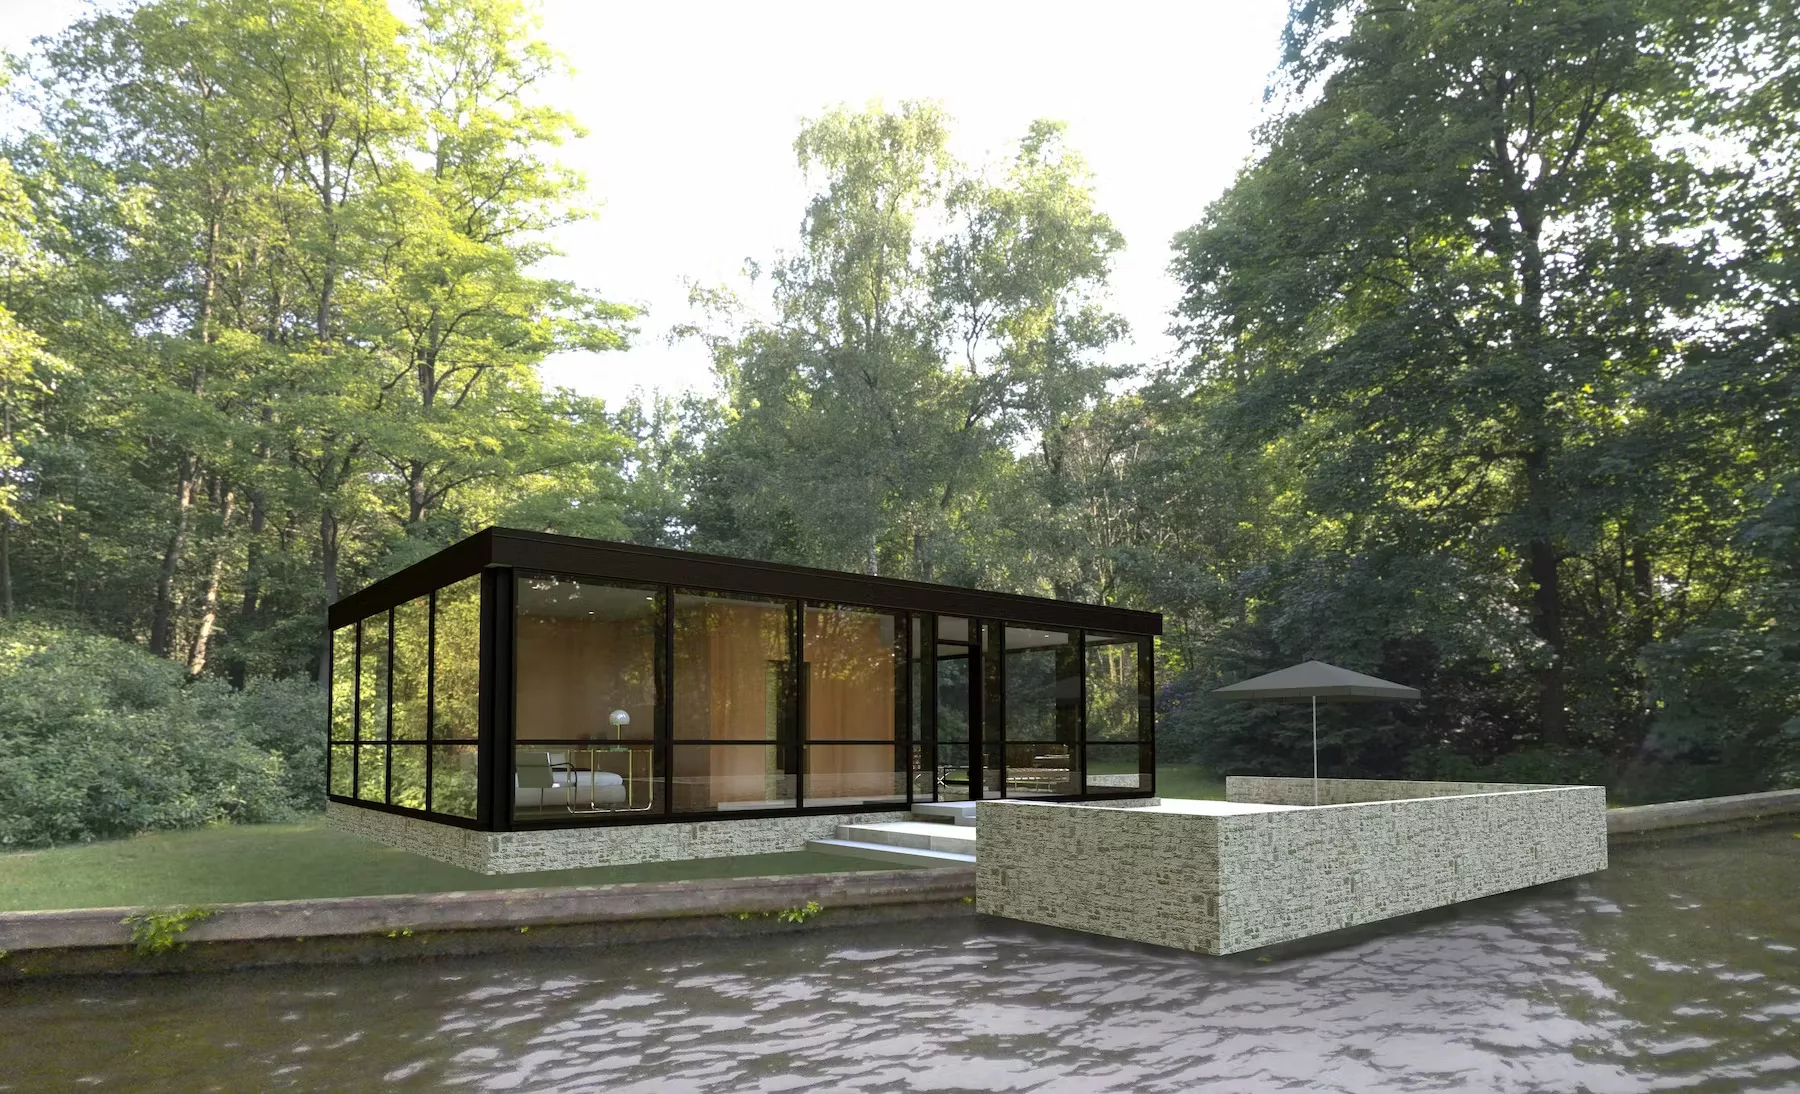 A Version of Philip Johnson’s Glass House To Call Your Own